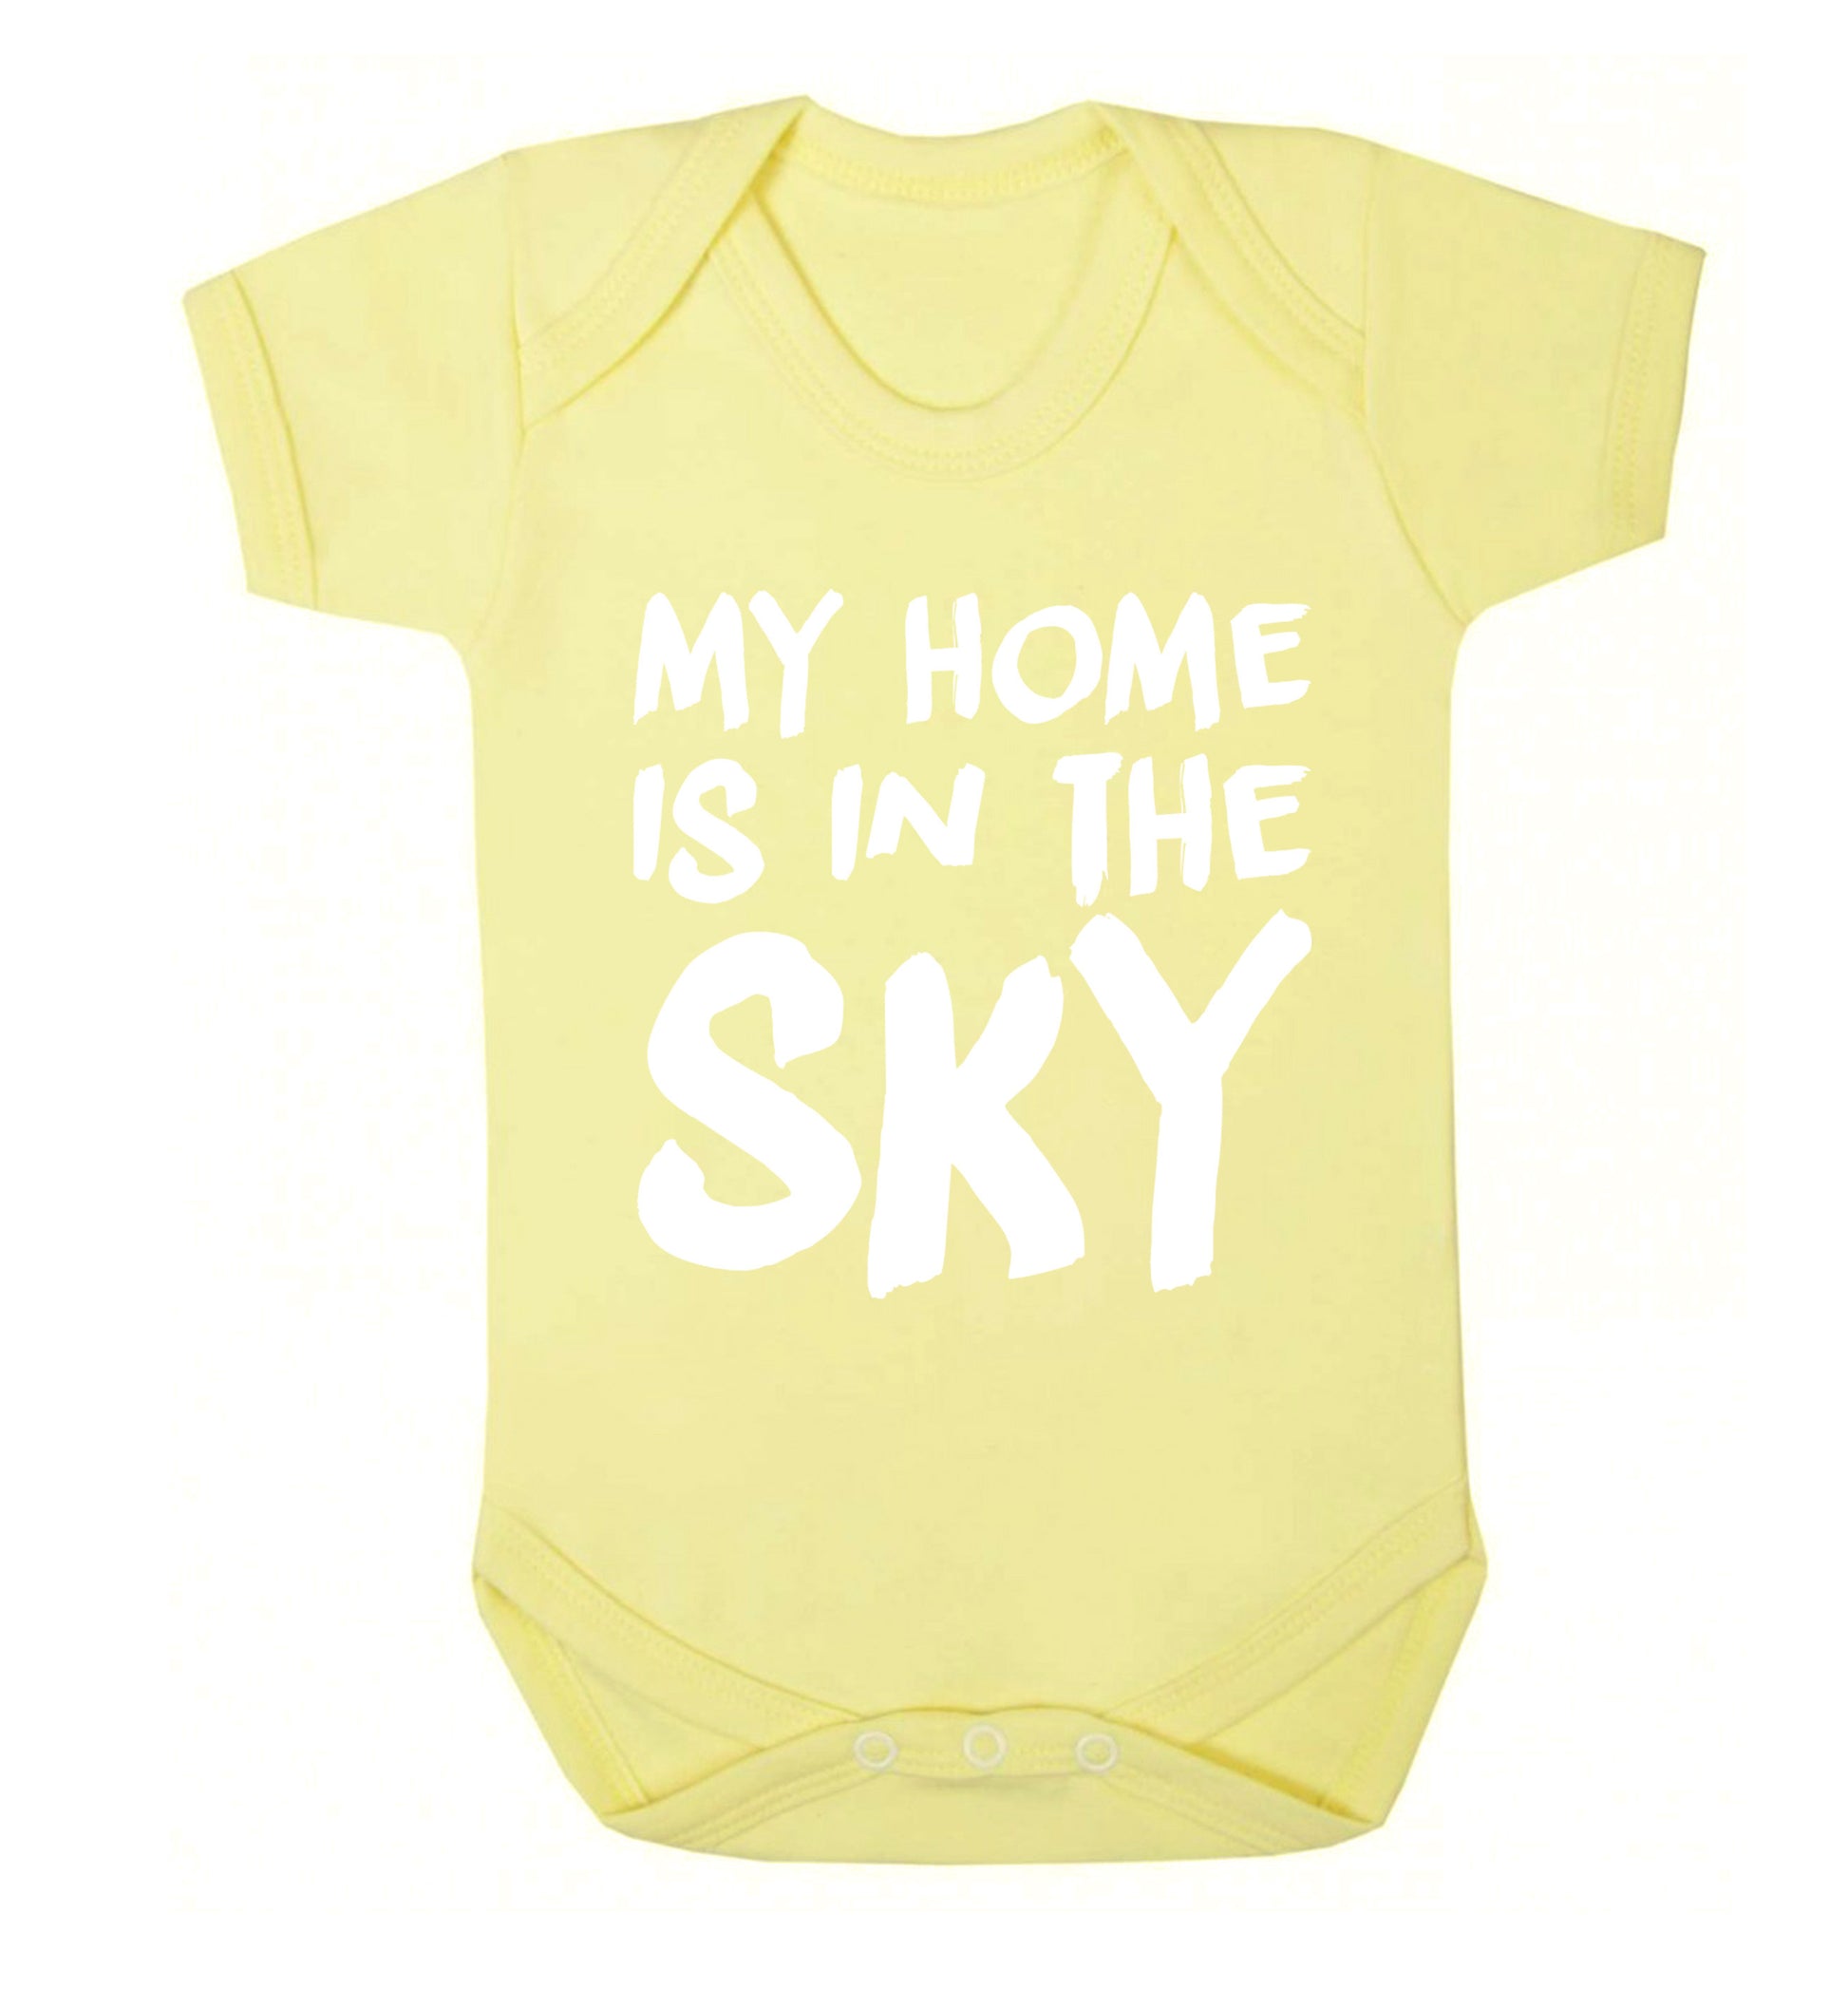 My home is in the sky Baby Vest pale yellow 18-24 months